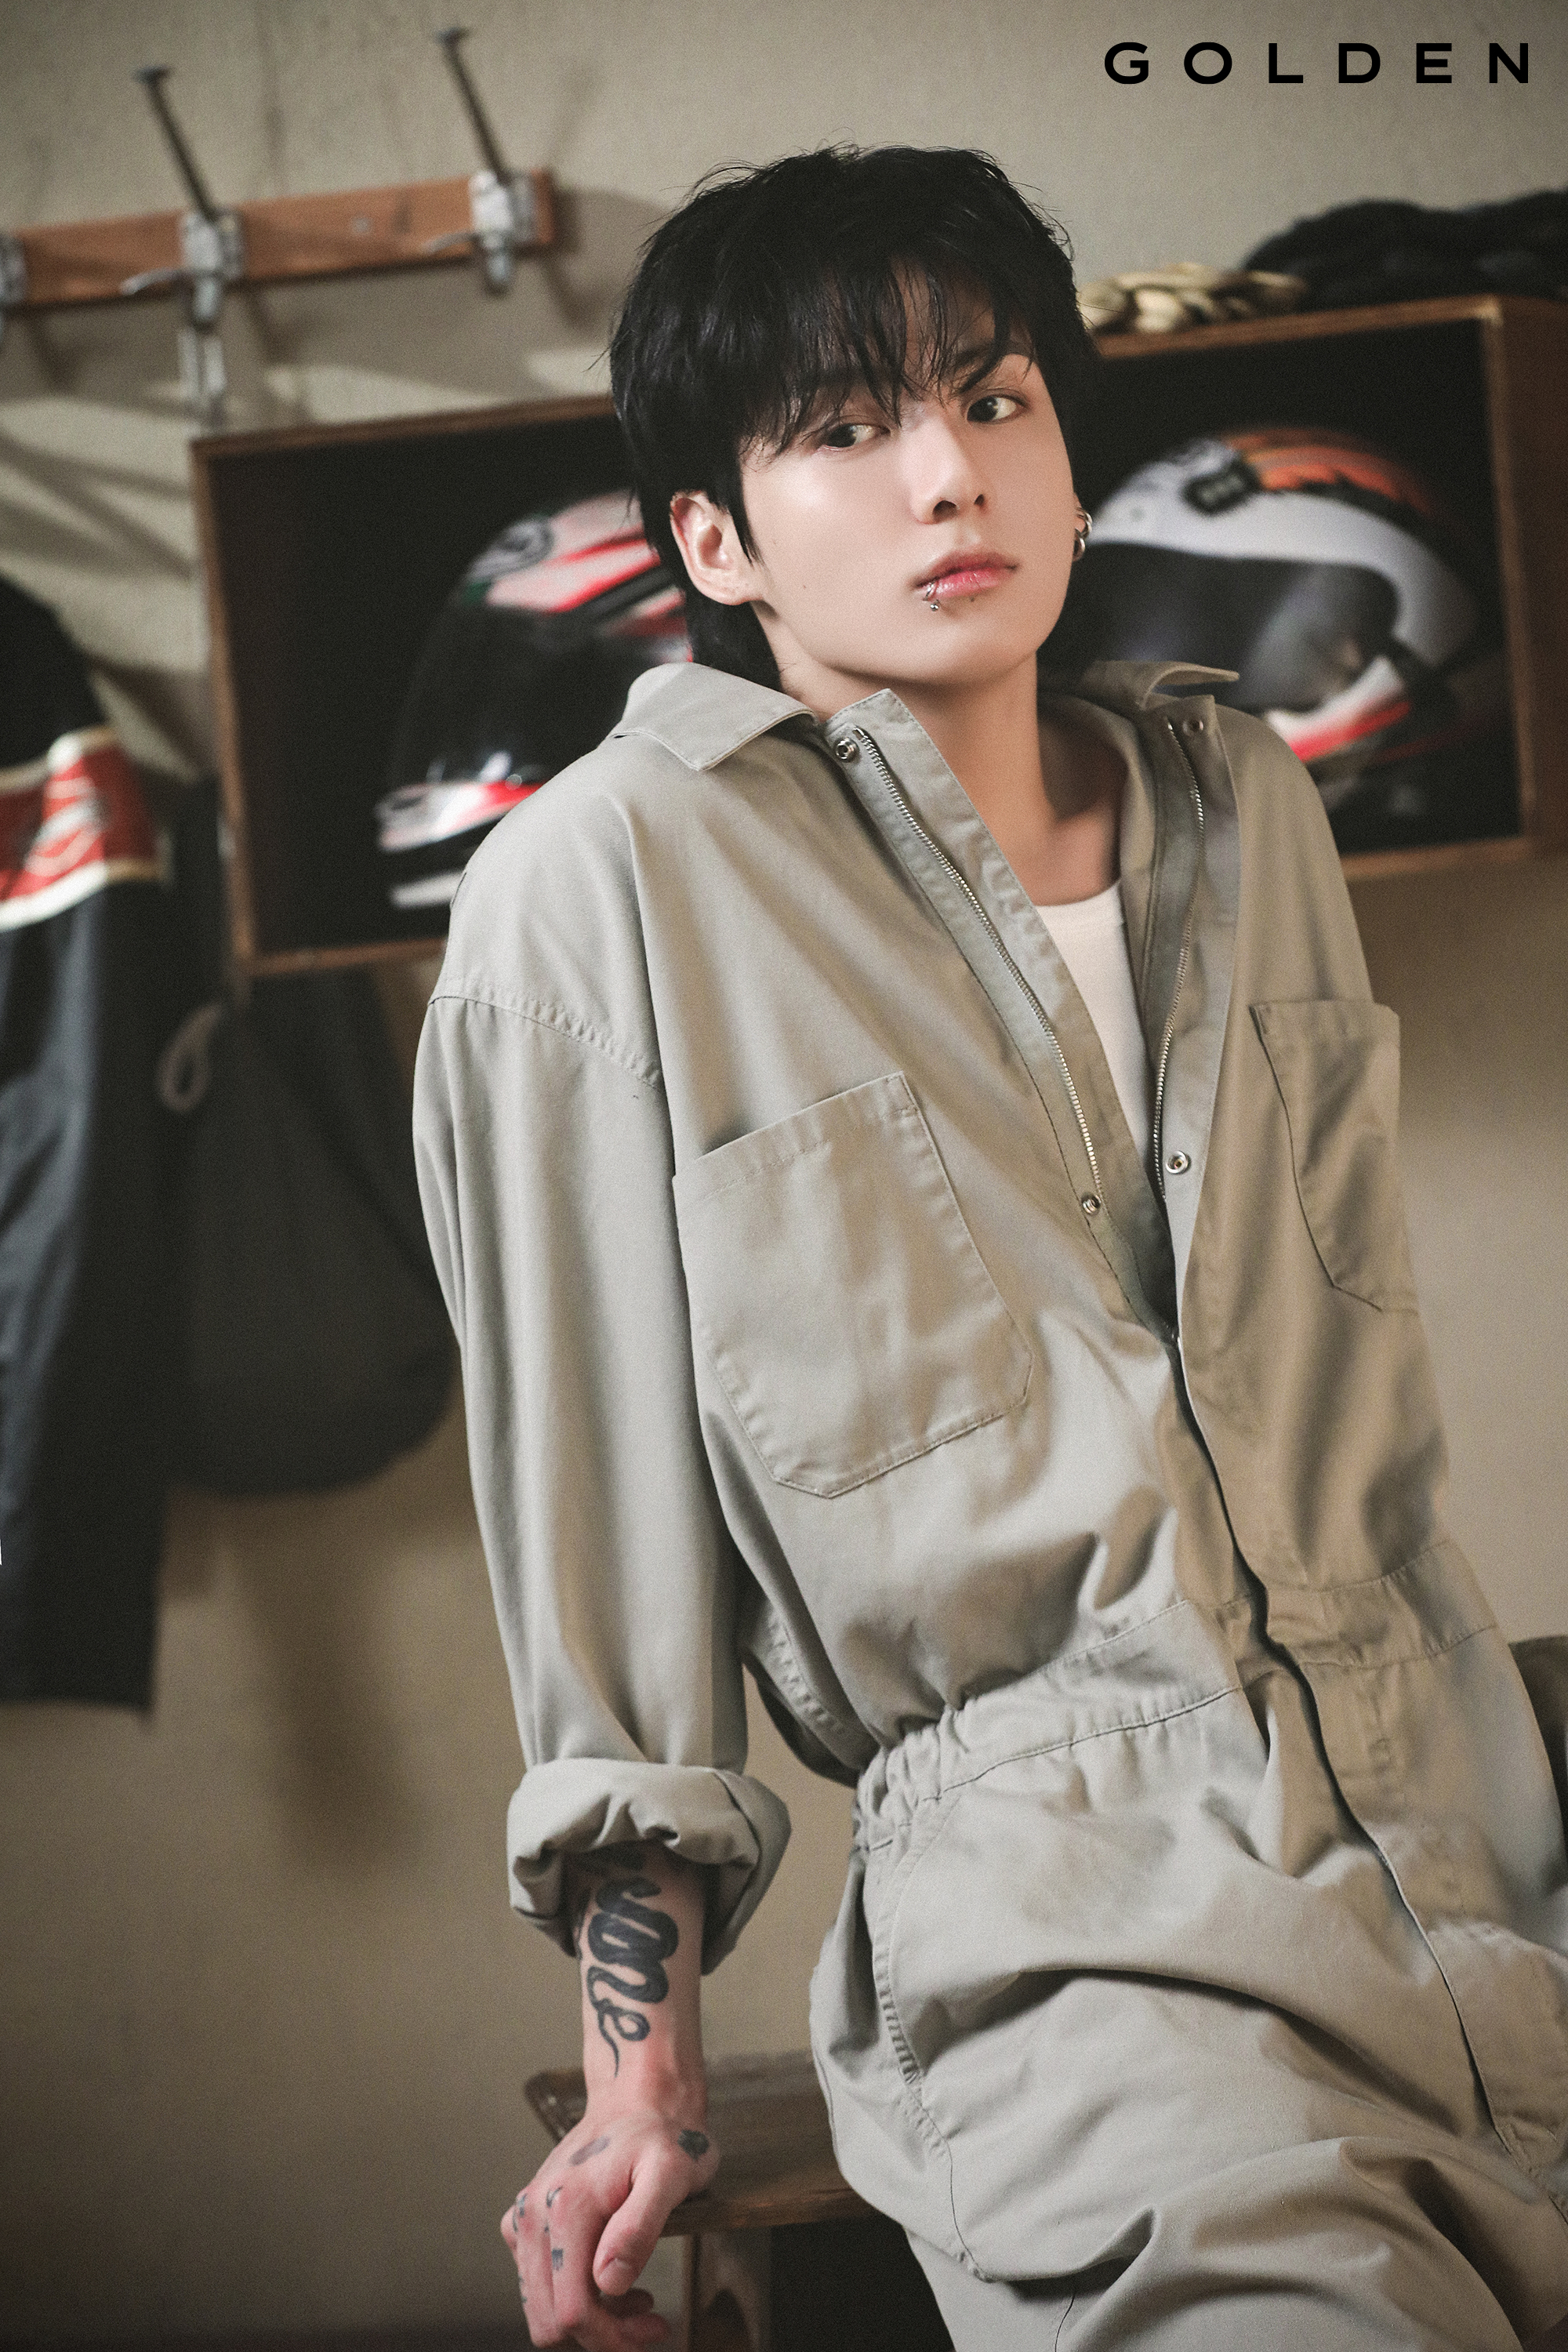 Golden Times on X: Jungkook 'GOLDEN' Concept Photo Sketch - SOLID (1)   / X